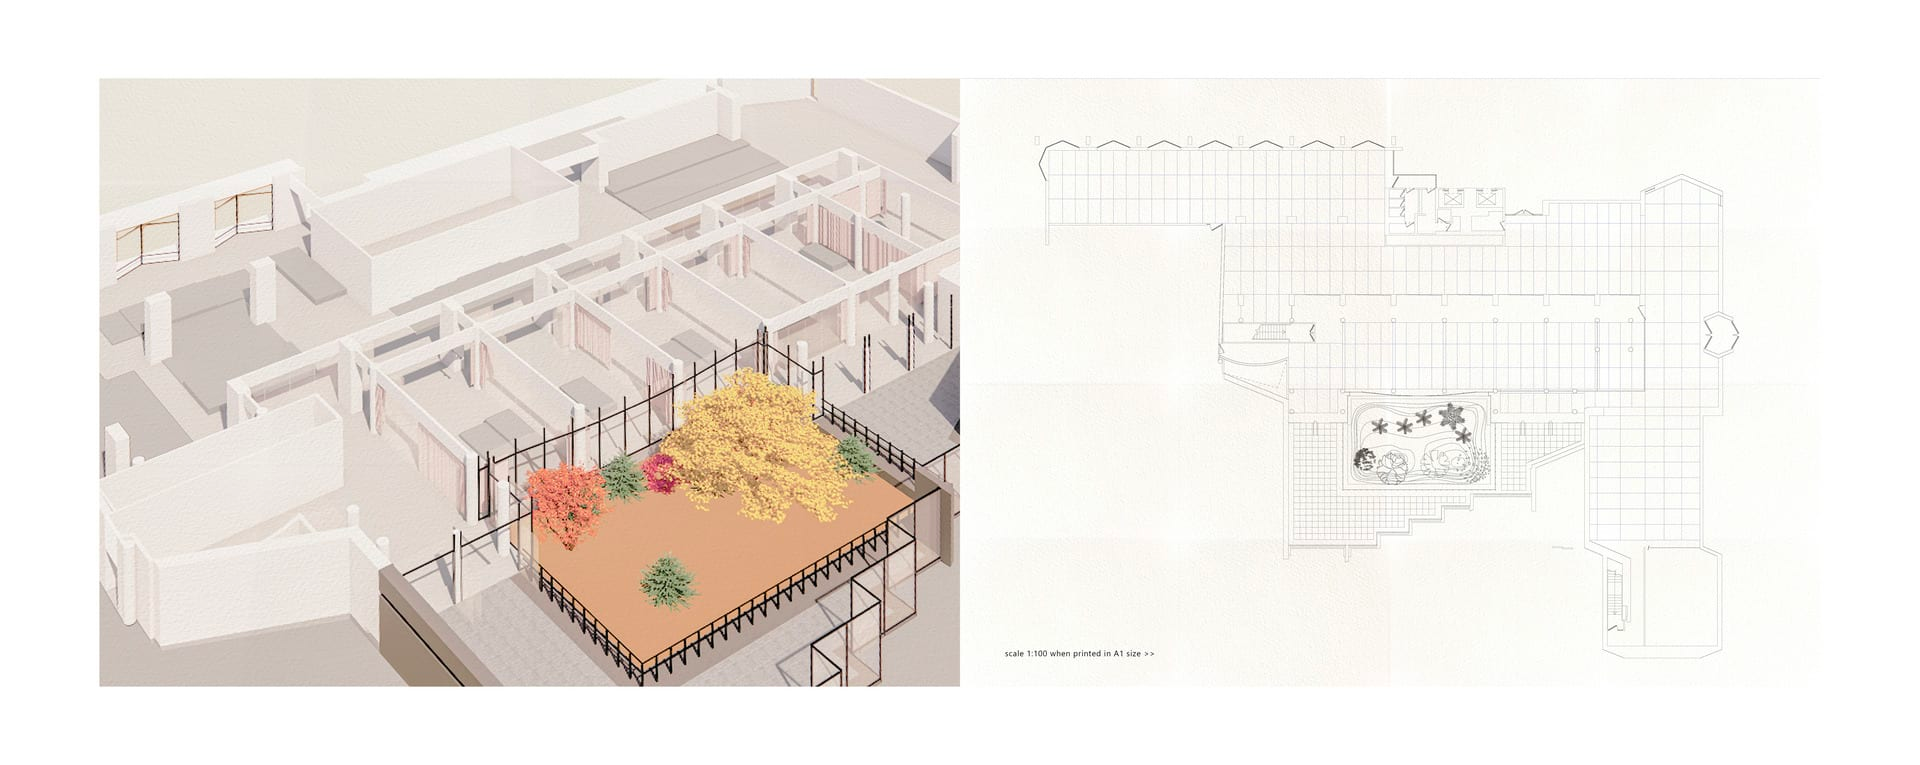 Two images side by the side. The one to the left shows a 3D roofless model of a multi-bedroomed building with a small roof garden. The image on the right is a black and white scale plan of the same building.